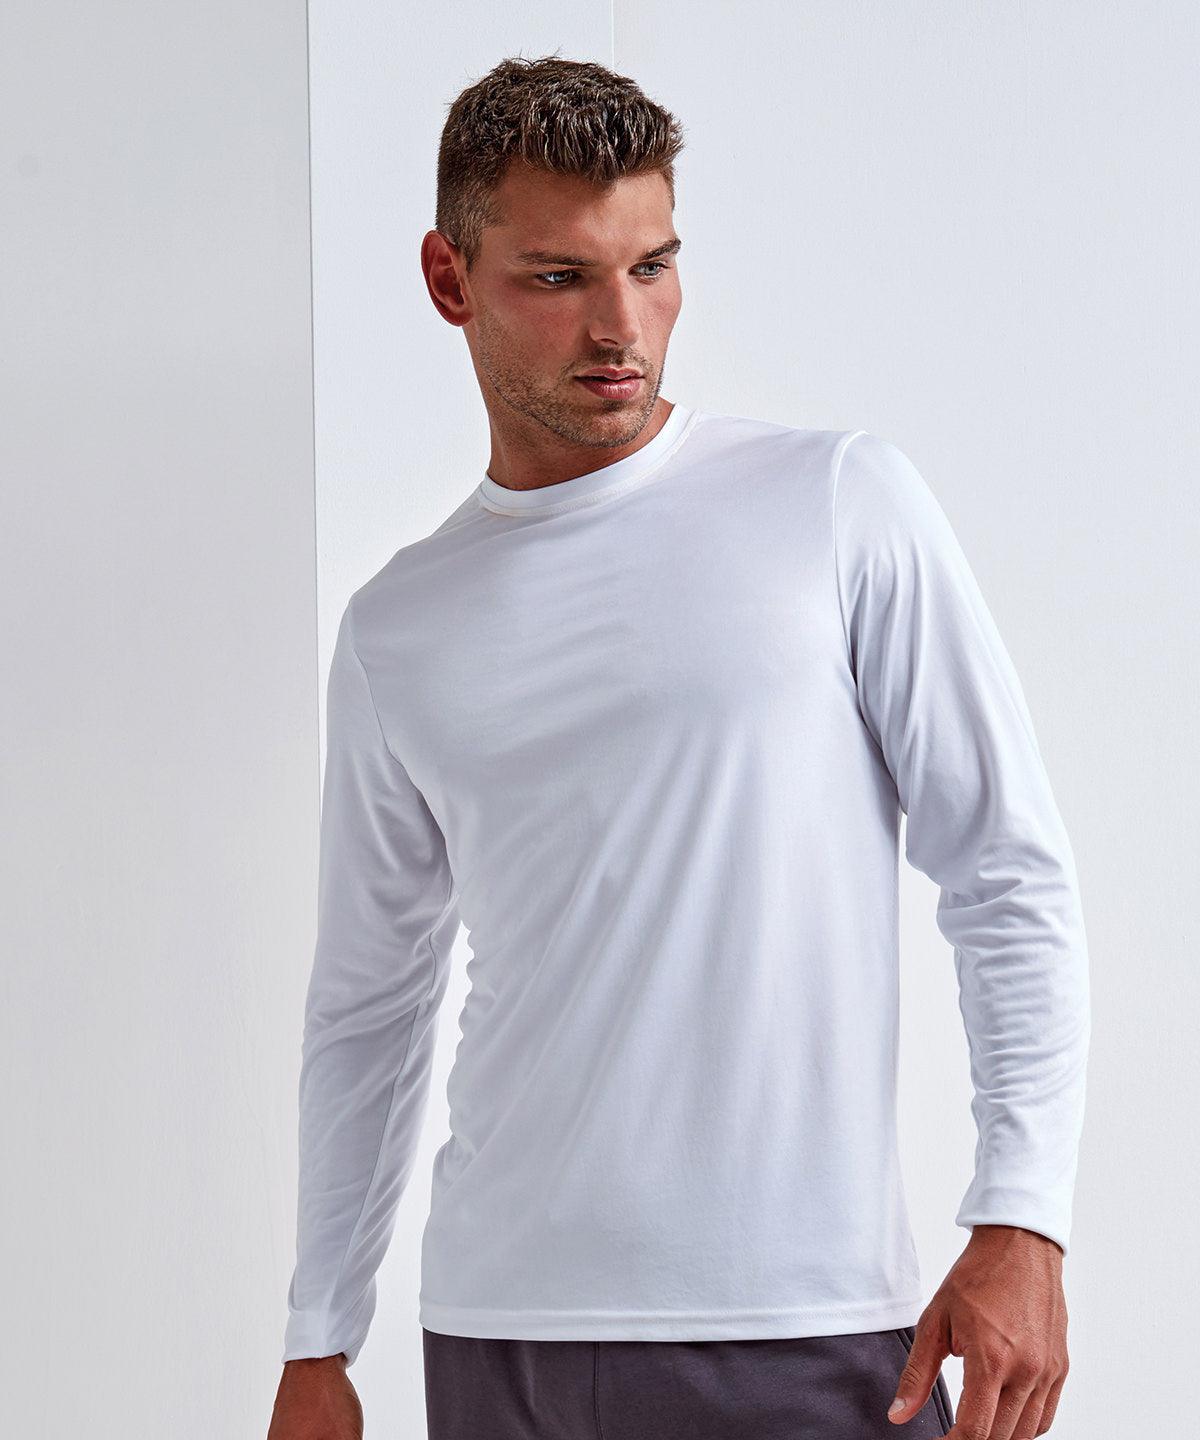 White - TriDri® long sleeve performance t-shirt T-Shirts TriDri® Activewear & Performance, Exclusives, Outdoor Sports, Plus Sizes, Rebrandable, Sports & Leisure, T-Shirts & Vests, UPF Protection Schoolwear Centres